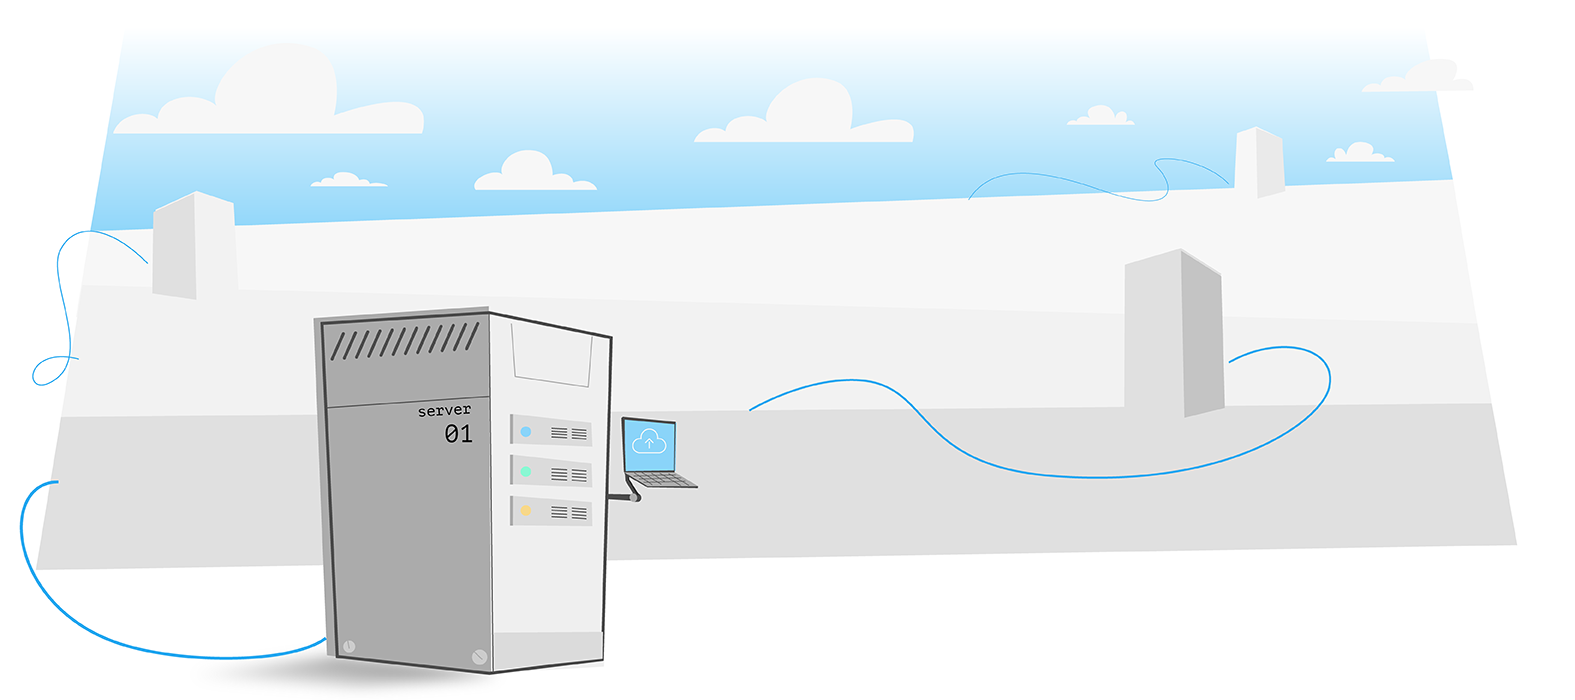 Cloud offsite backup illustration.  Computer machine making a wireless backup to a building on a floating stone in the clouds.